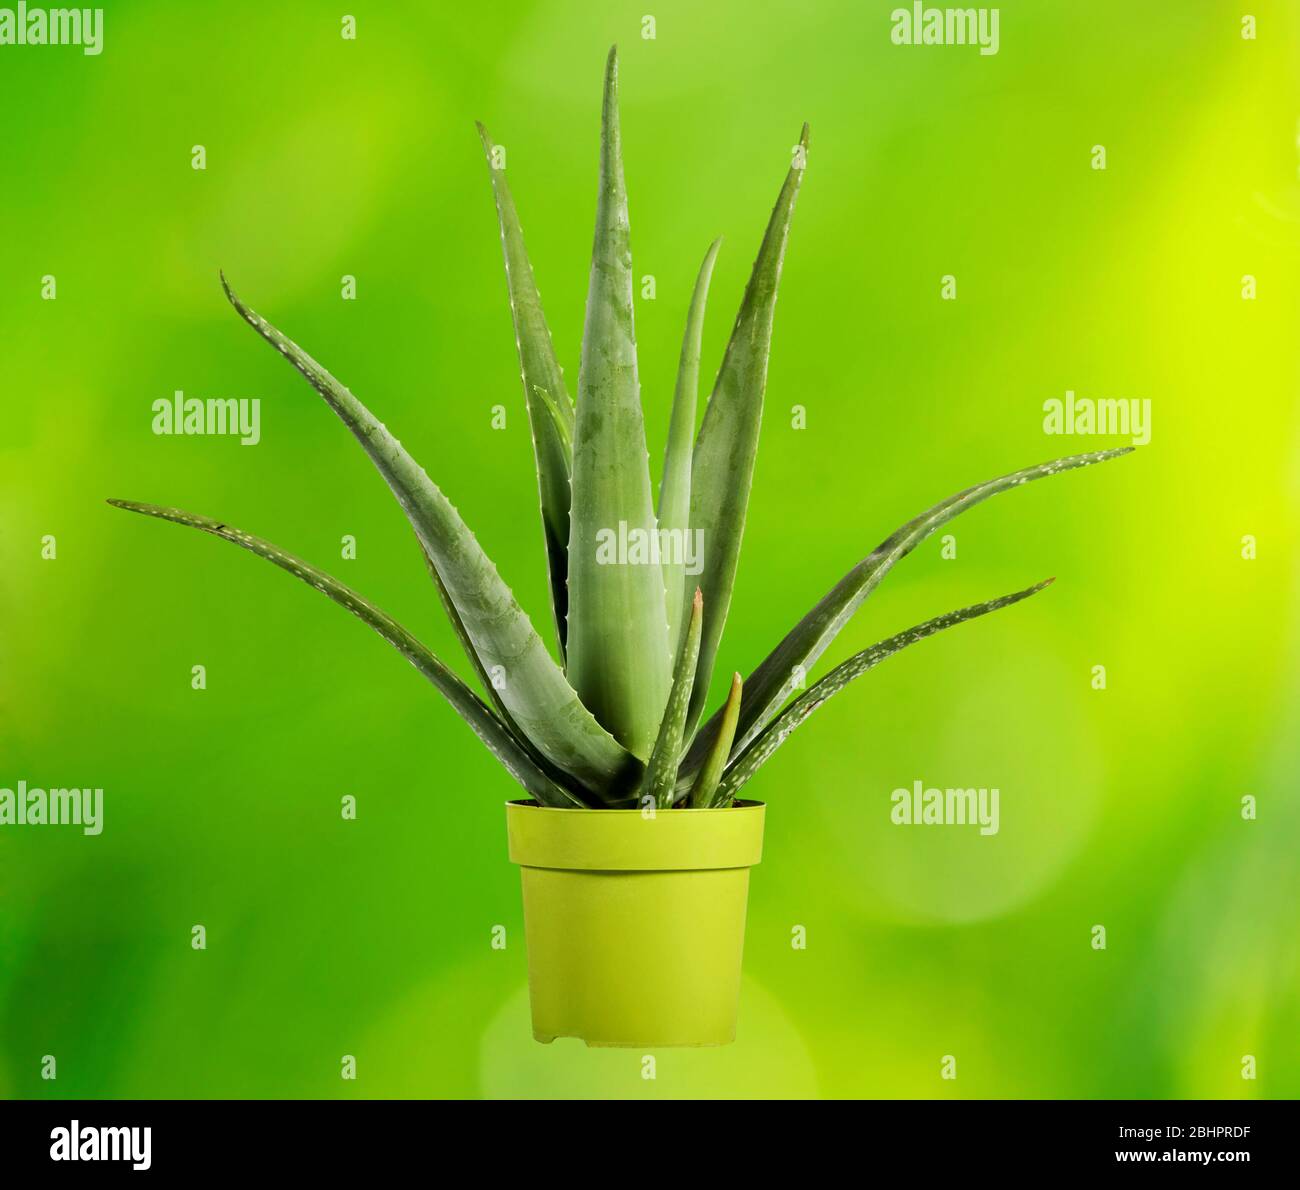 Close up Aloe Vera Plant, Used for Herbal Medicine, on Yellow Green Pot and green background Stock Photo